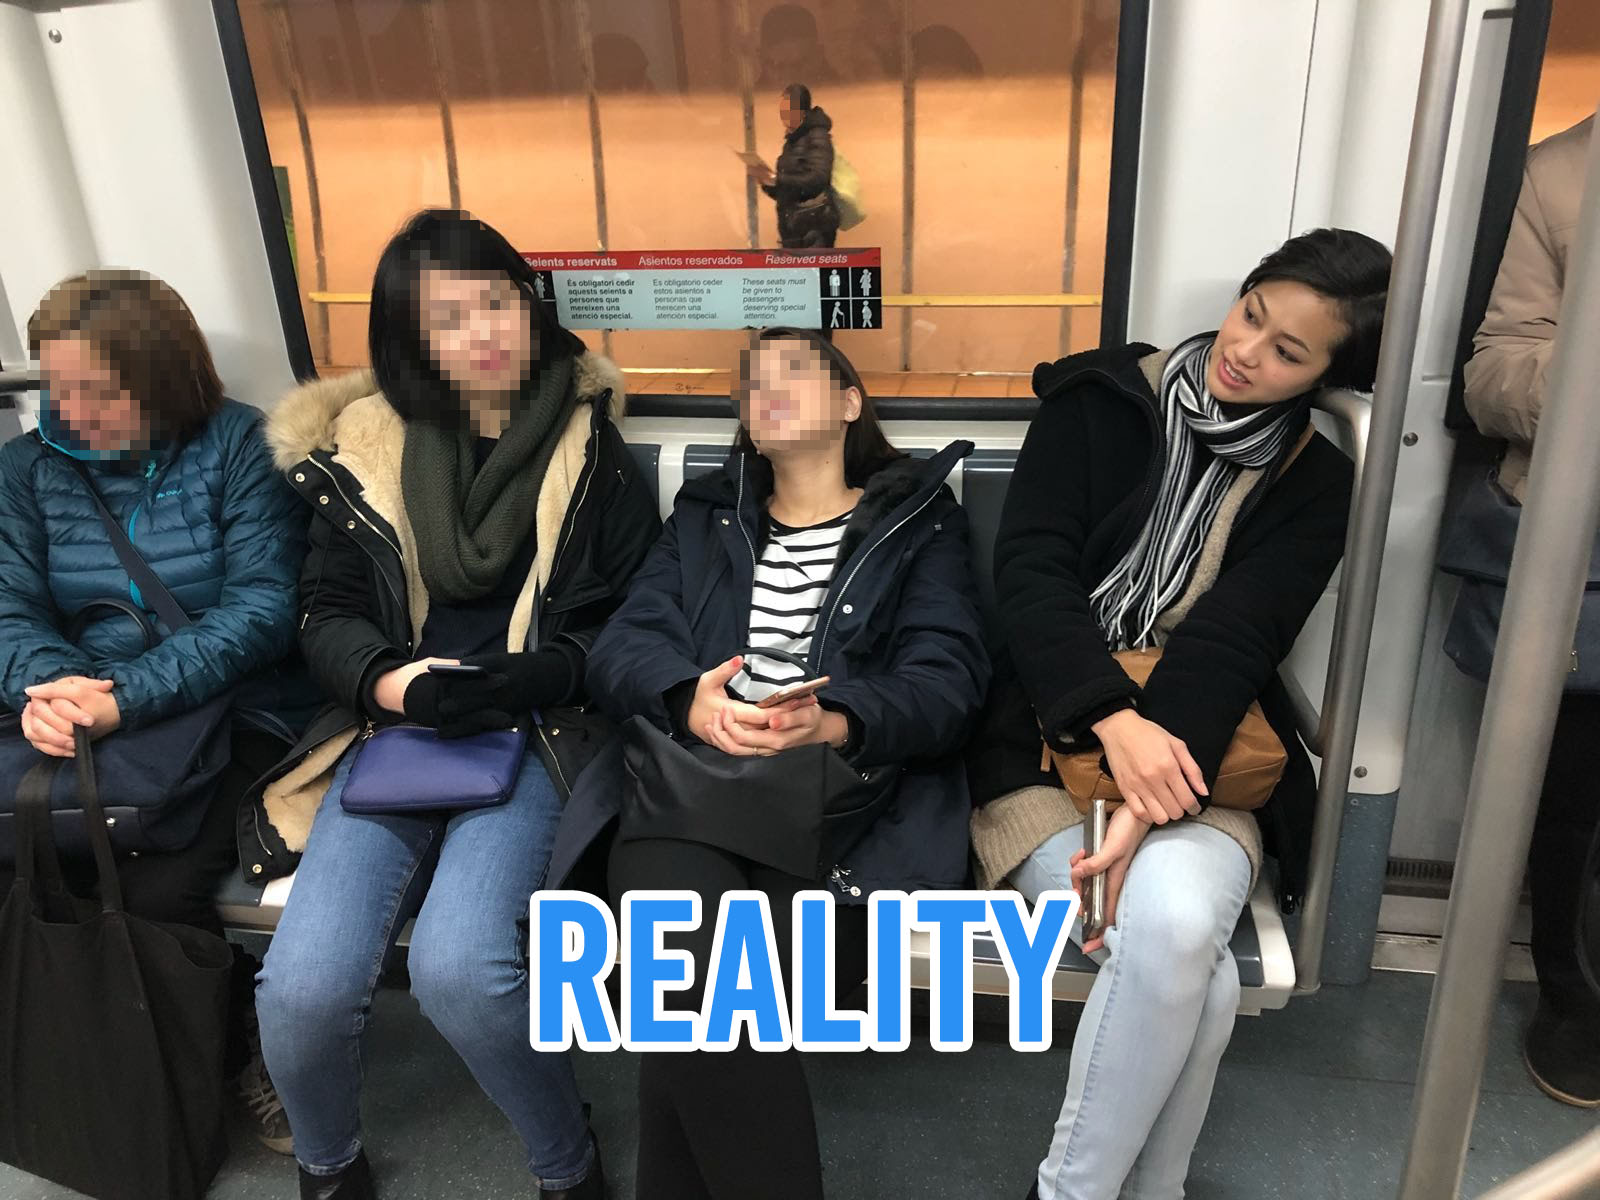 Tired people on a train